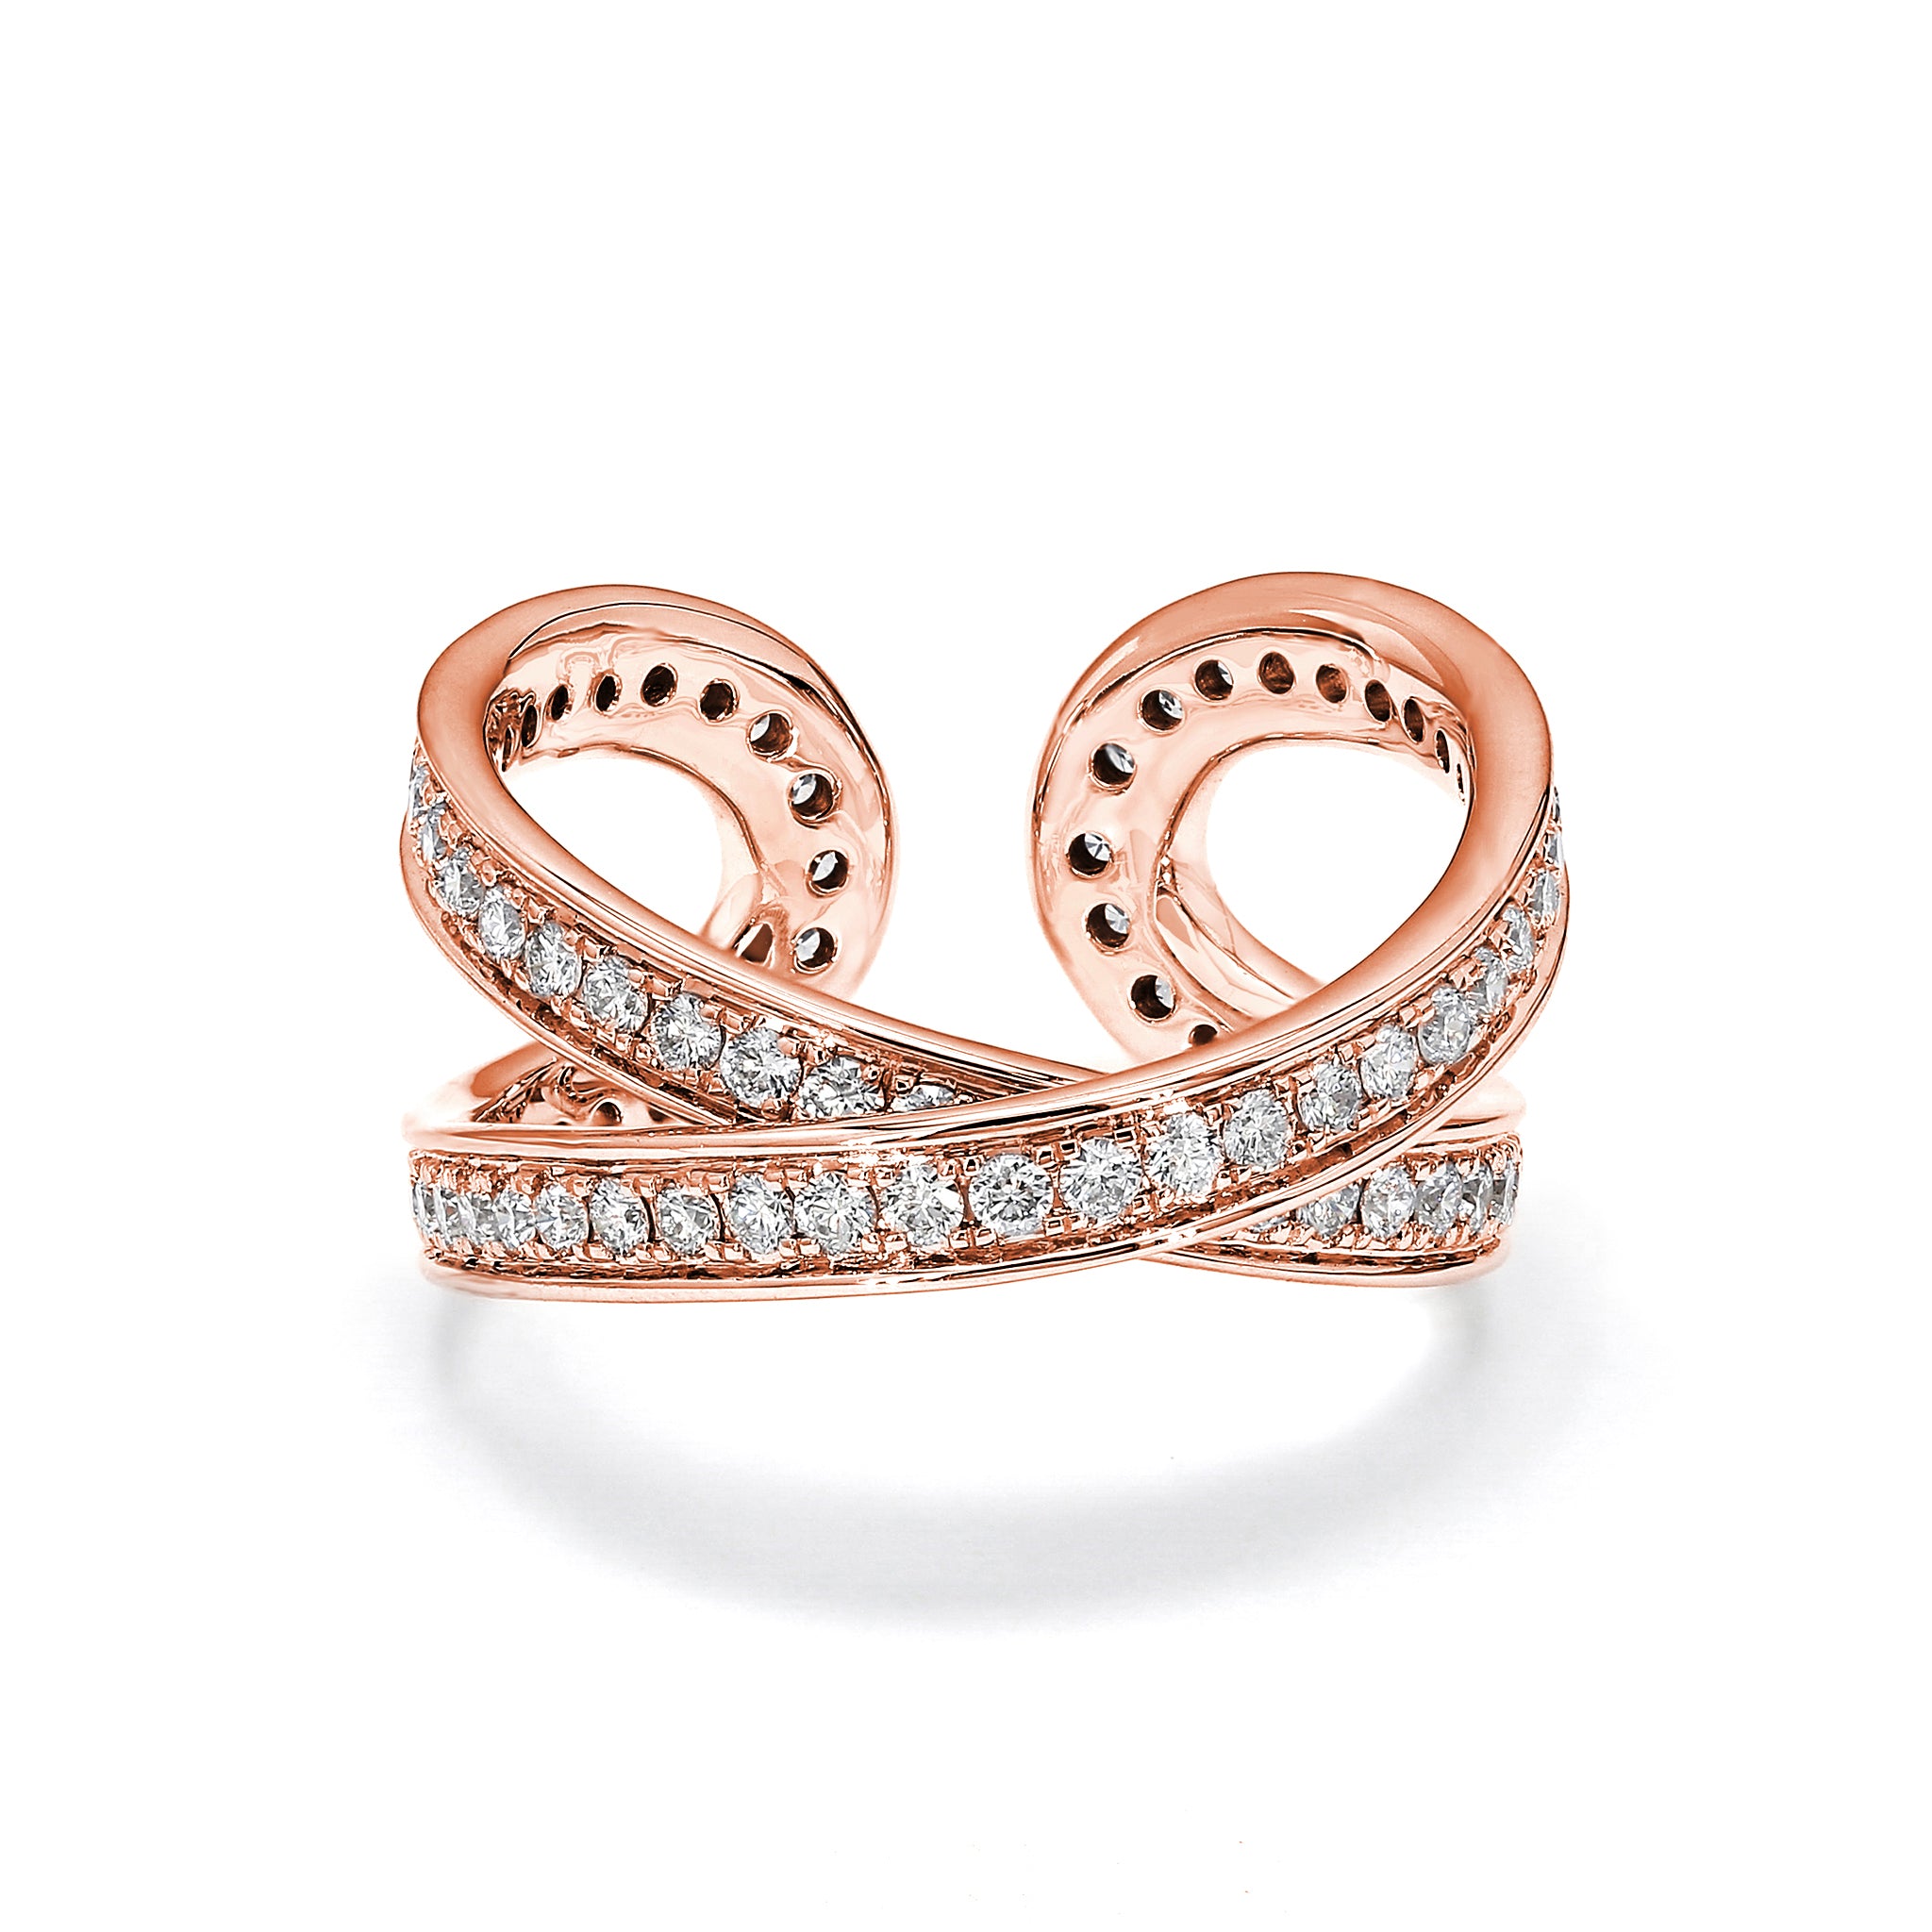 Shimansky - Infinity Classic Pavé Diamond Ring Crafted in 18K Rose Gold